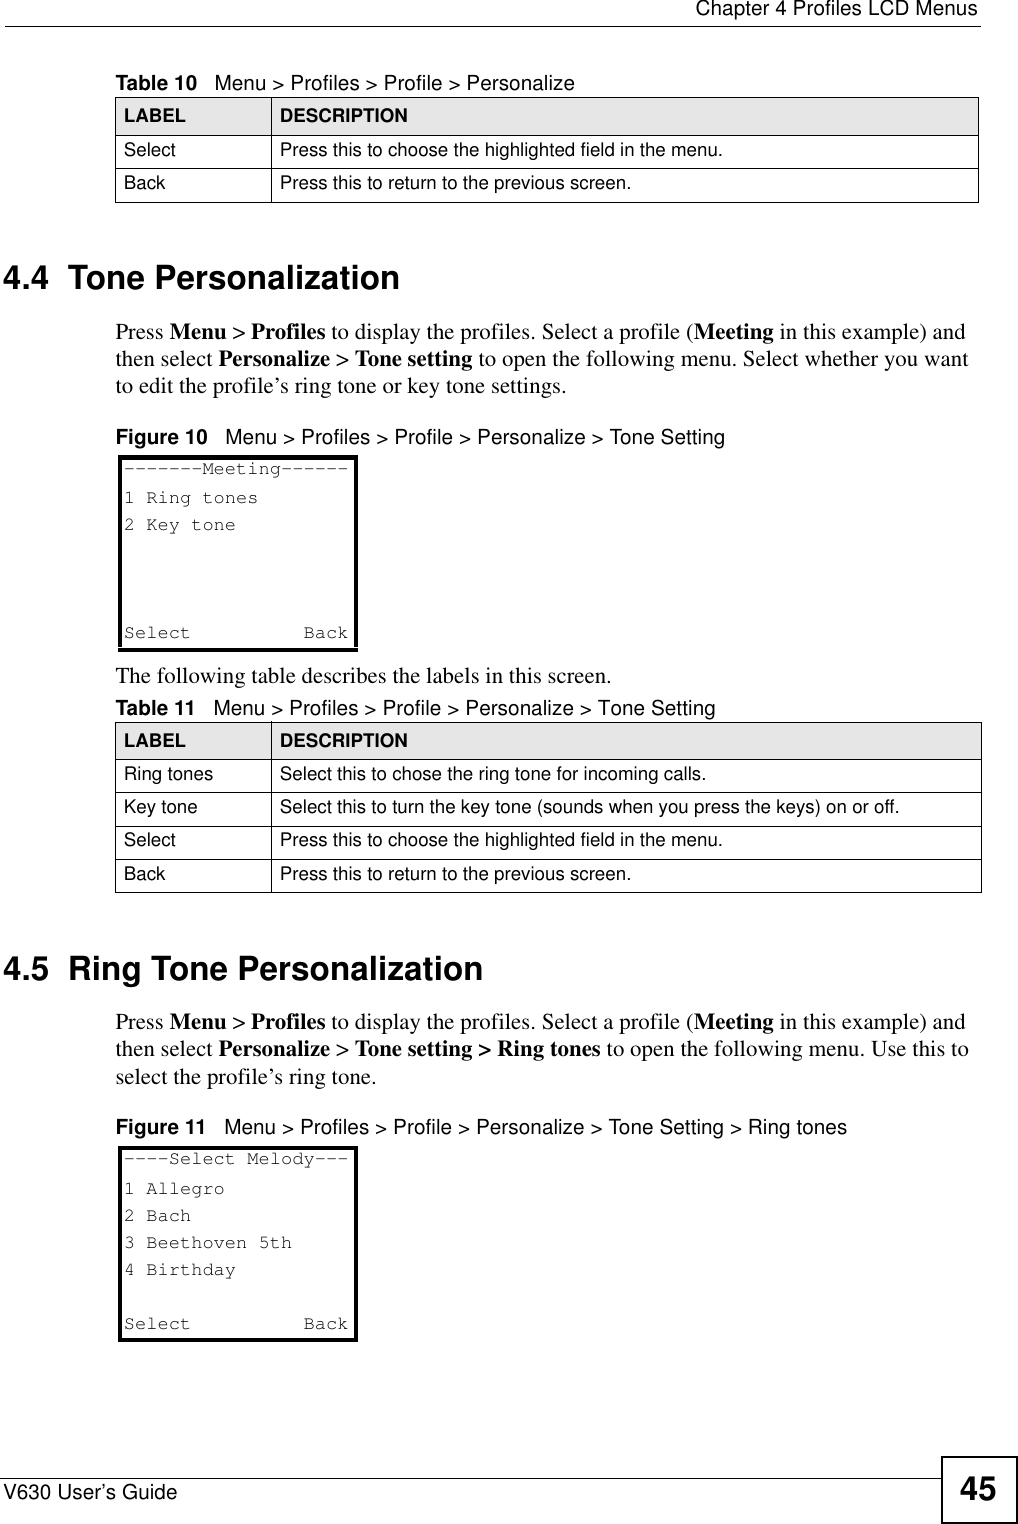  Chapter 4 Profiles LCD MenusV630 User’s Guide 454.4  Tone Personalization Press Menu &gt; Profiles to display the profiles. Select a profile (Meeting in this example) and then select Personalize &gt; Tone setting to open the following menu. Select whether you want to edit the profile’s ring tone or key tone settings.Figure 10   Menu &gt; Profiles &gt; Profile &gt; Personalize &gt; Tone SettingThe following table describes the labels in this screen.4.5  Ring Tone Personalization Press Menu &gt; Profiles to display the profiles. Select a profile (Meeting in this example) and then select Personalize &gt; Tone setting &gt; Ring tones to open the following menu. Use this to select the profile’s ring tone. Figure 11   Menu &gt; Profiles &gt; Profile &gt; Personalize &gt; Tone Setting &gt; Ring tonesSelect Press this to choose the highlighted field in the menu.Back Press this to return to the previous screen.Table 10   Menu &gt; Profiles &gt; Profile &gt; PersonalizeLABEL DESCRIPTIONTable 11   Menu &gt; Profiles &gt; Profile &gt; Personalize &gt; Tone SettingLABEL DESCRIPTIONRing tones Select this to chose the ring tone for incoming calls.Key tone Select this to turn the key tone (sounds when you press the keys) on or off.Select Press this to choose the highlighted field in the menu.Back Press this to return to the previous screen.-------Meeting------1 Ring tones2 Key toneSelect   Back----Select Melody---1 Allegro2 Bach3 Beethoven 5th4 BirthdaySelect   Back